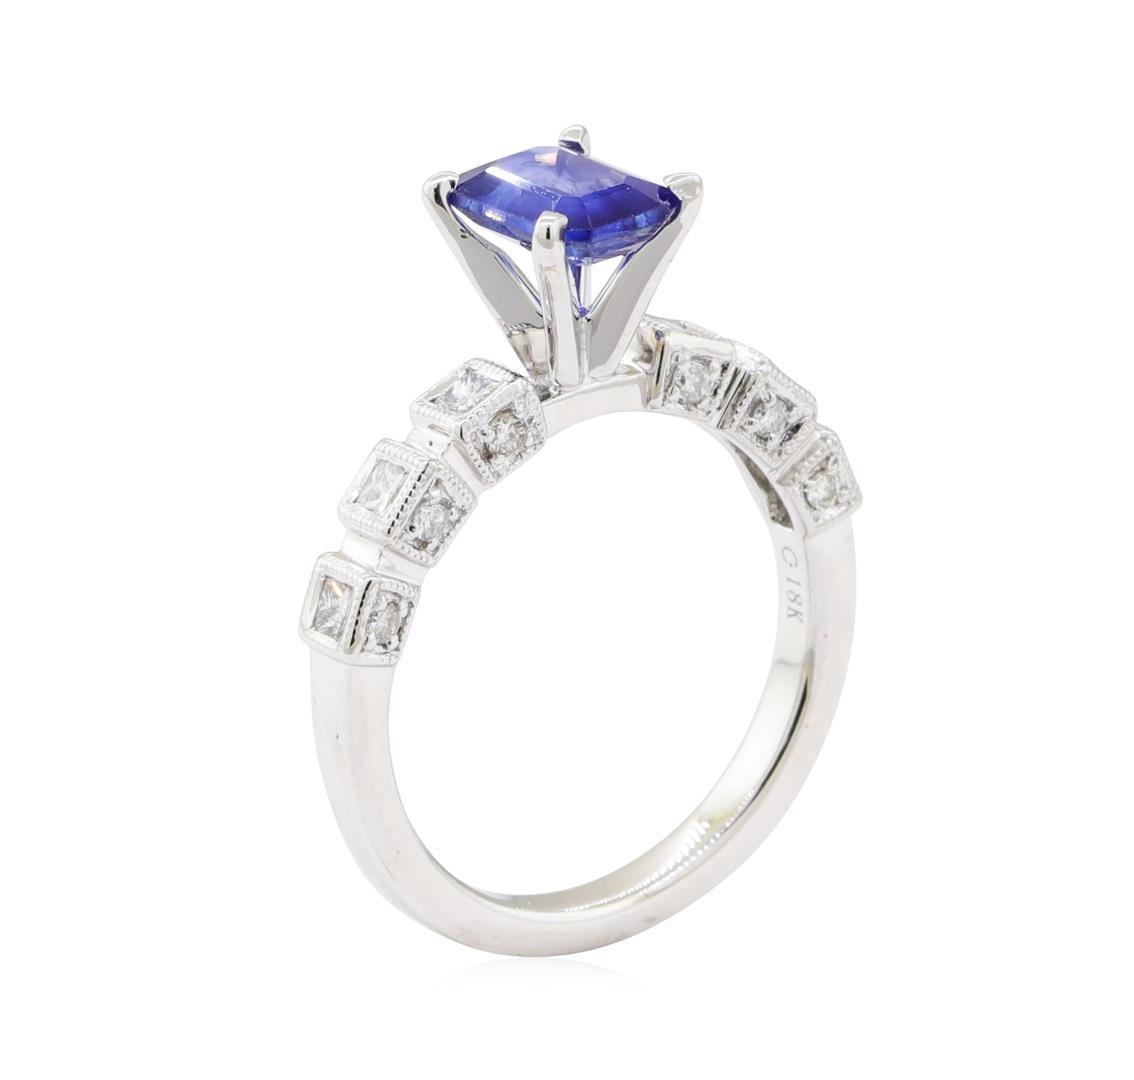 1.75 ctw Sapphire and Diamond Ring - 18KT White Gold